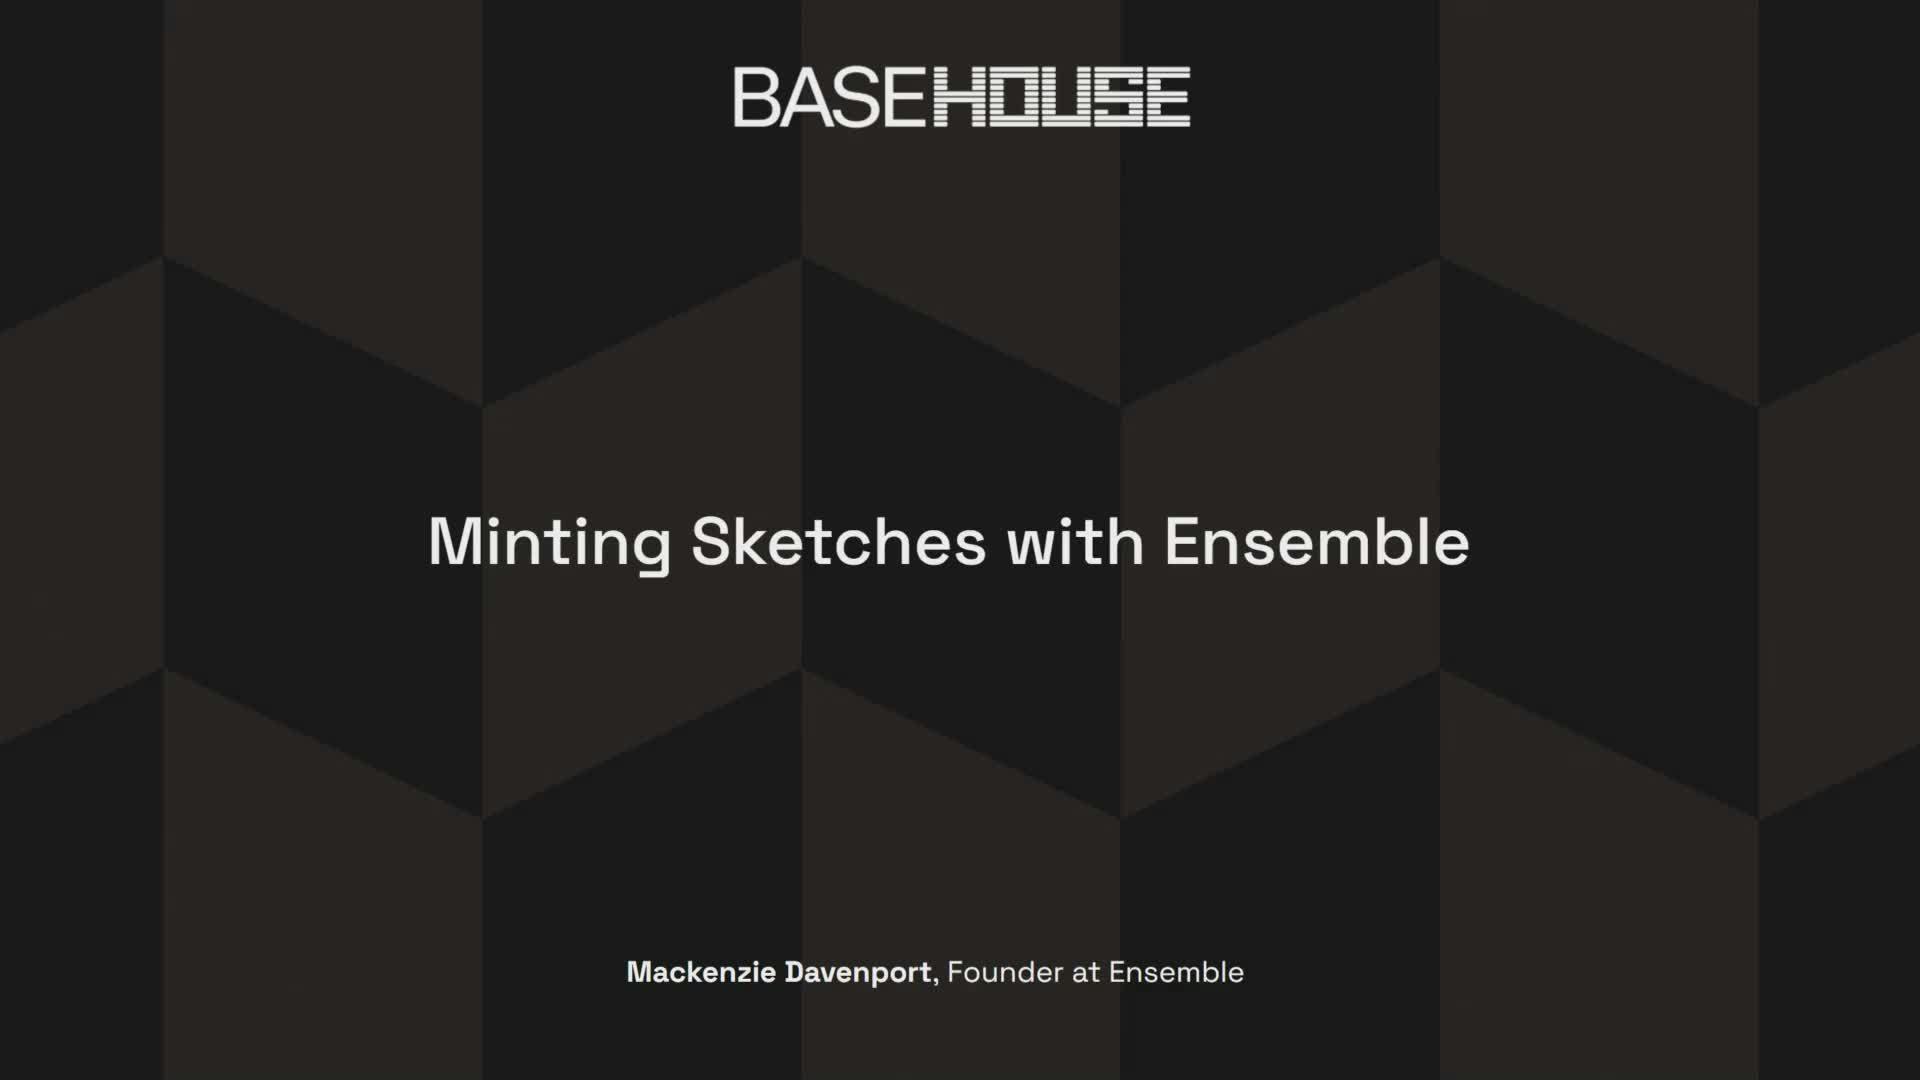 
Minting Sketches with Ensemble